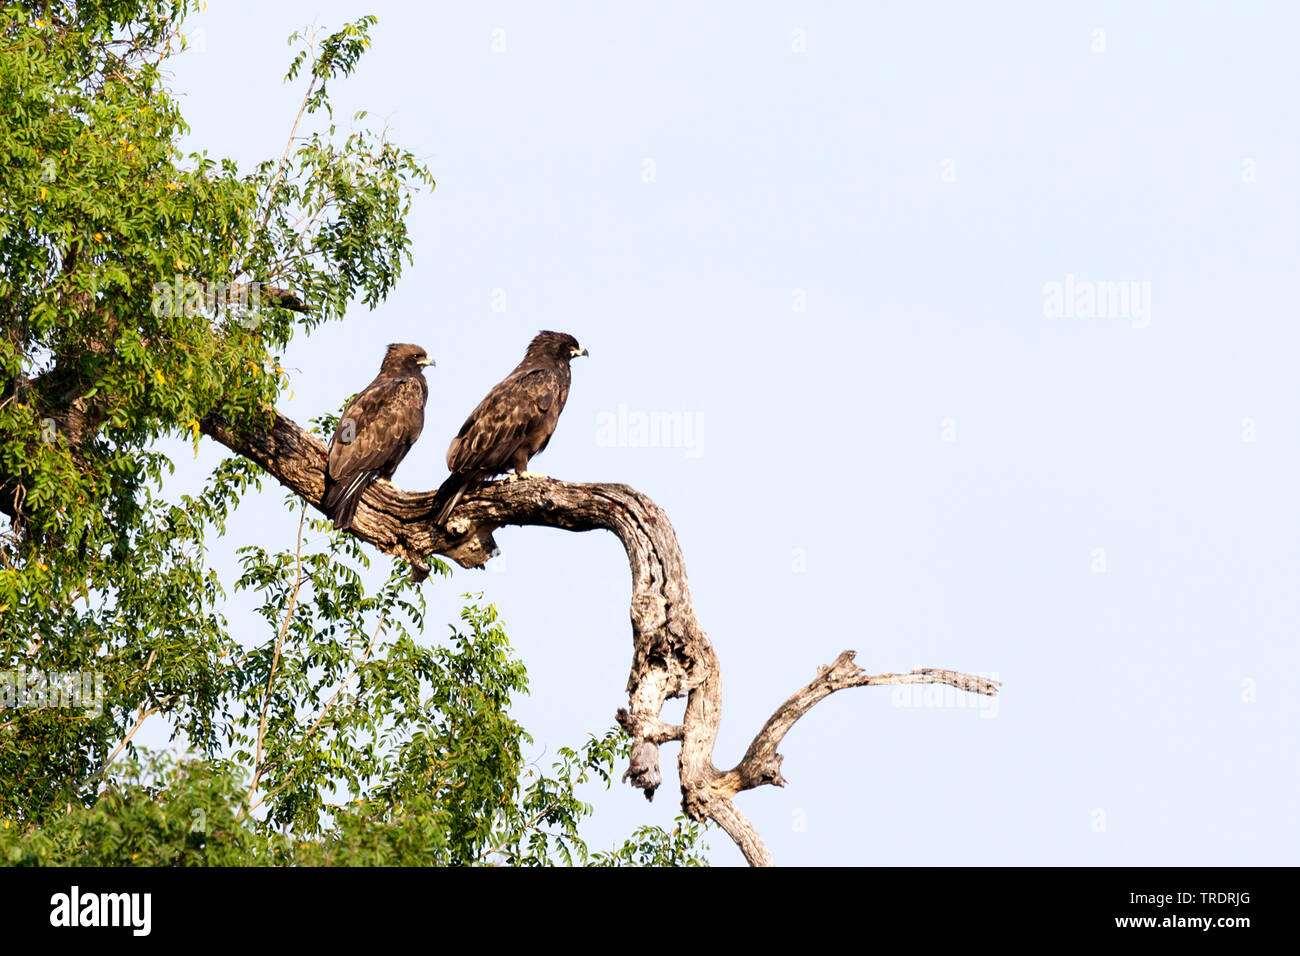 Wahlberg's eagle (Hieraaetus wahlbergi), couple perching together on a dead branch, South Africa, Mpumalanga, Kruger National Park Stock Photo